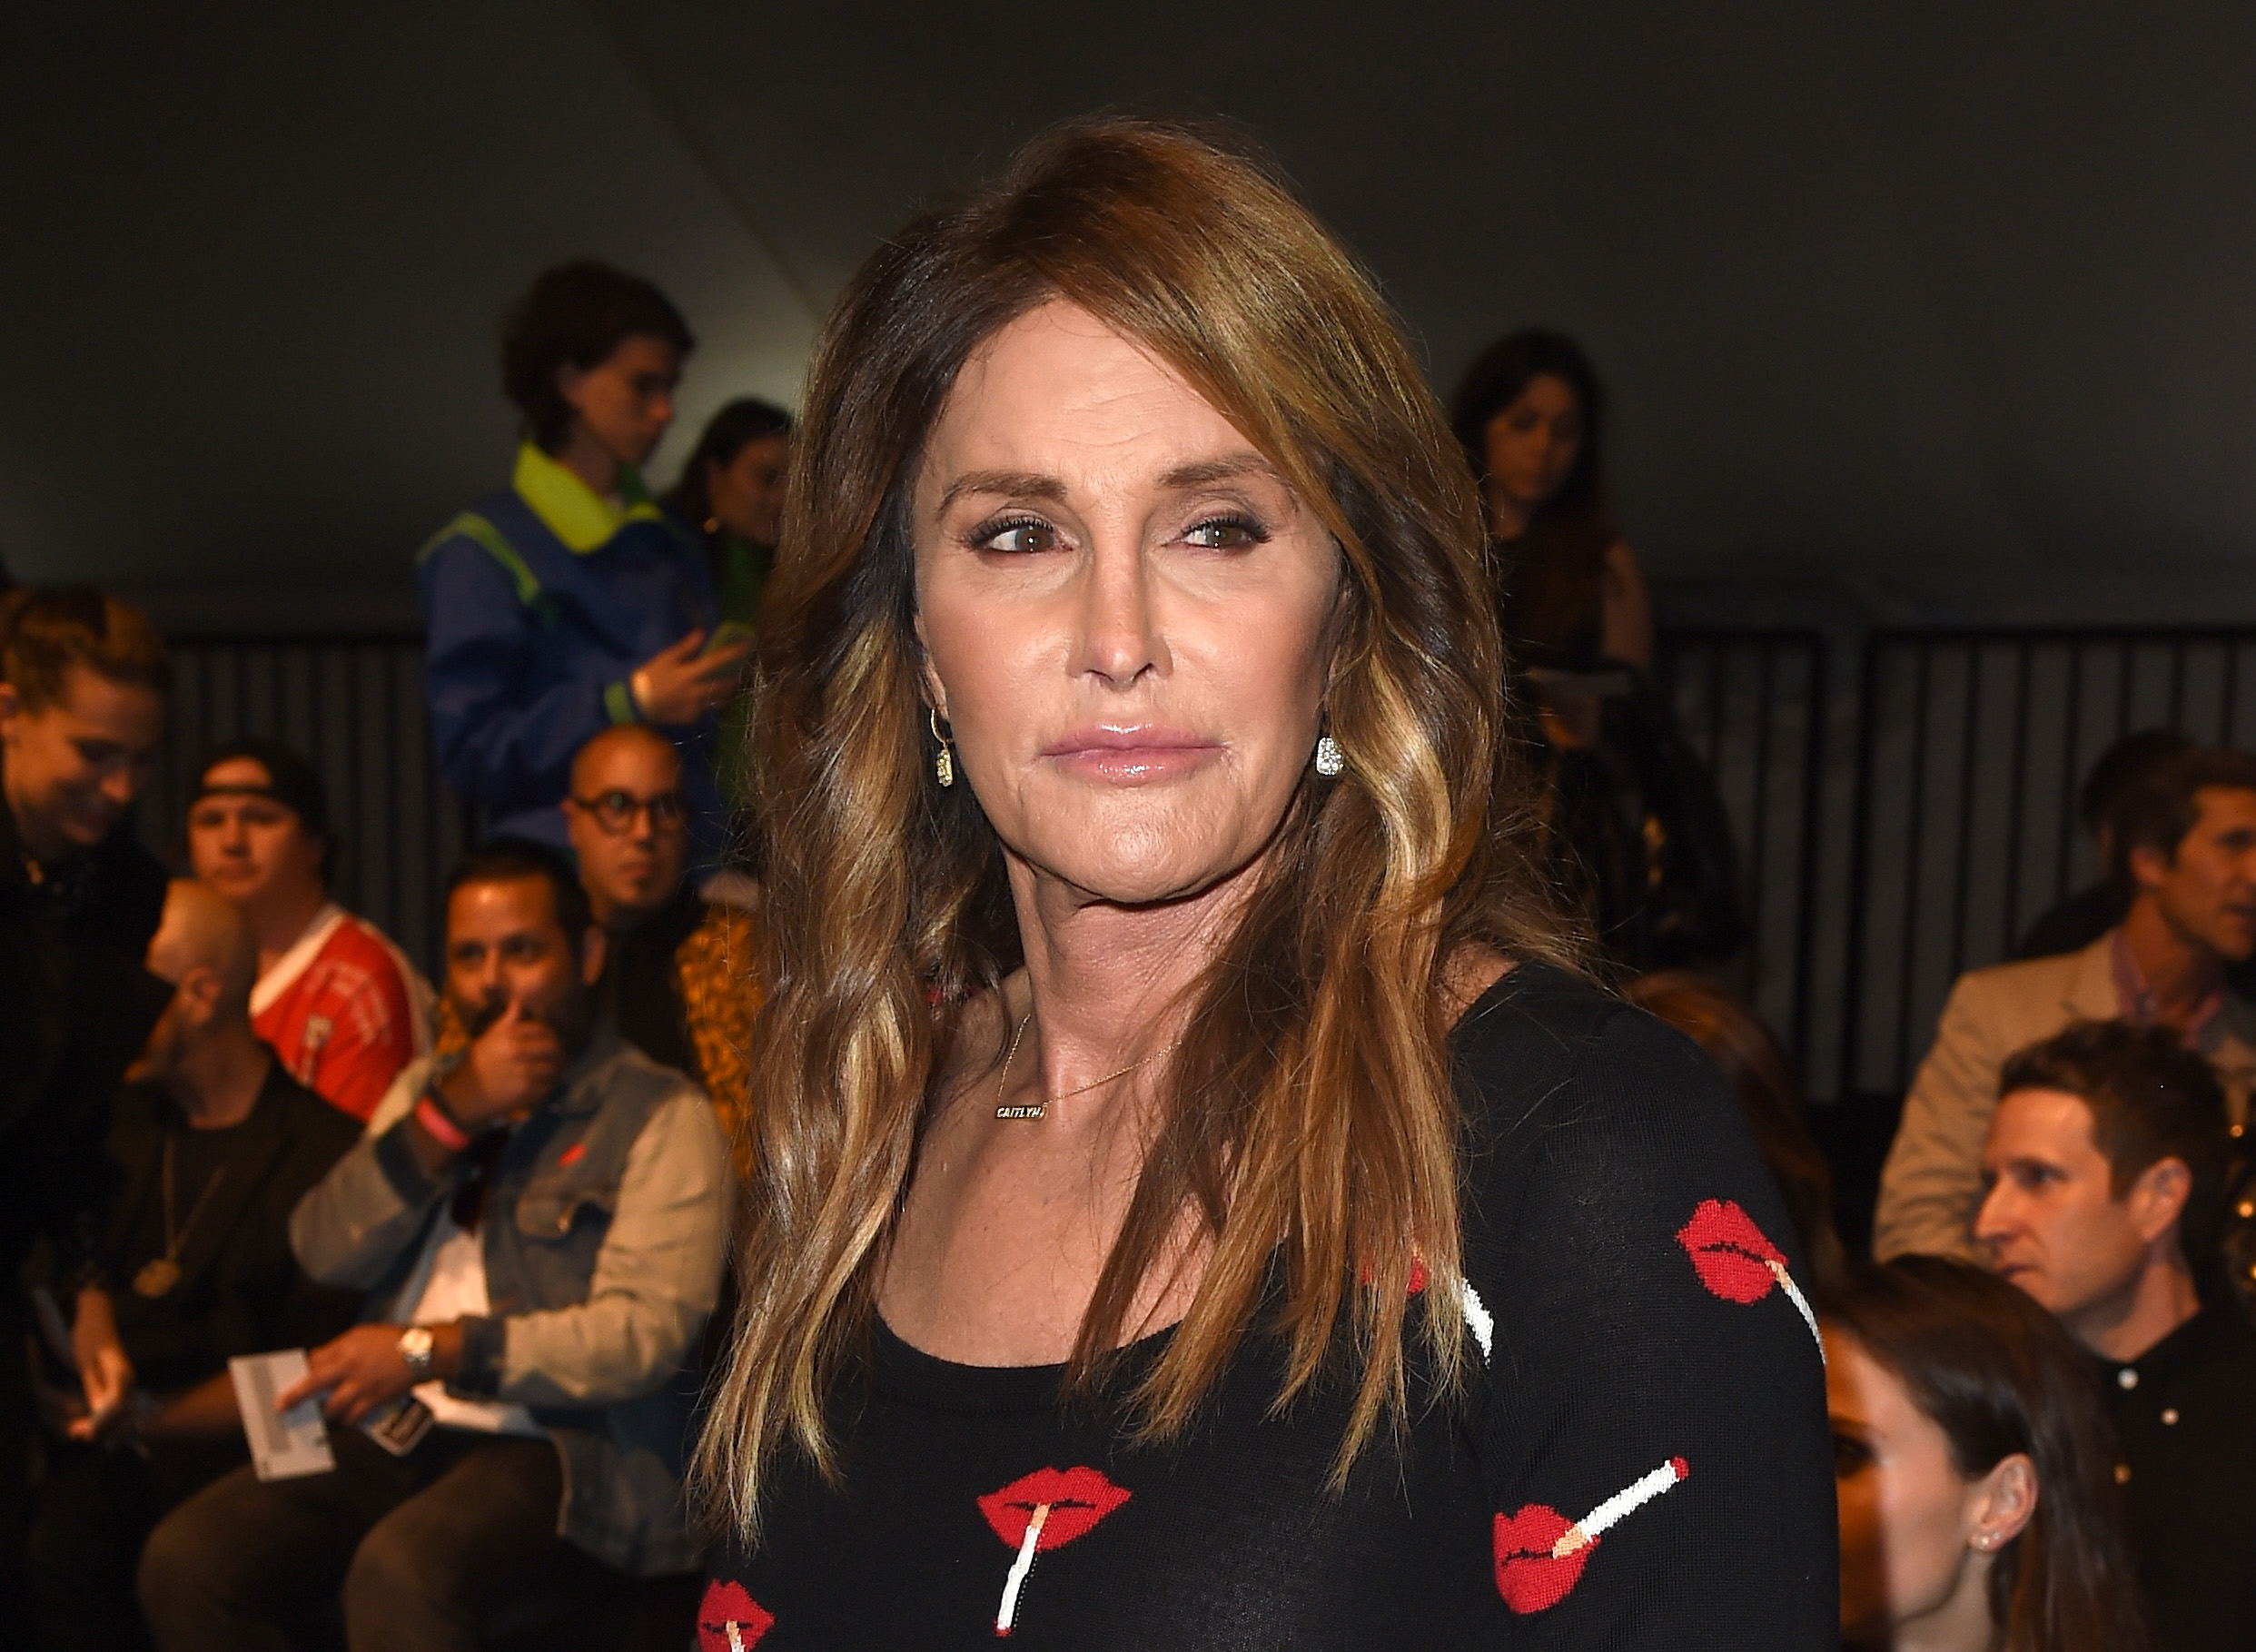 Caitlyn Jenner attends the Moschino Spring/Summer 17 Menswear and Women's Resort Collection during MADE LA on June 10. (Kevin Winter&mdash;Getty Images)